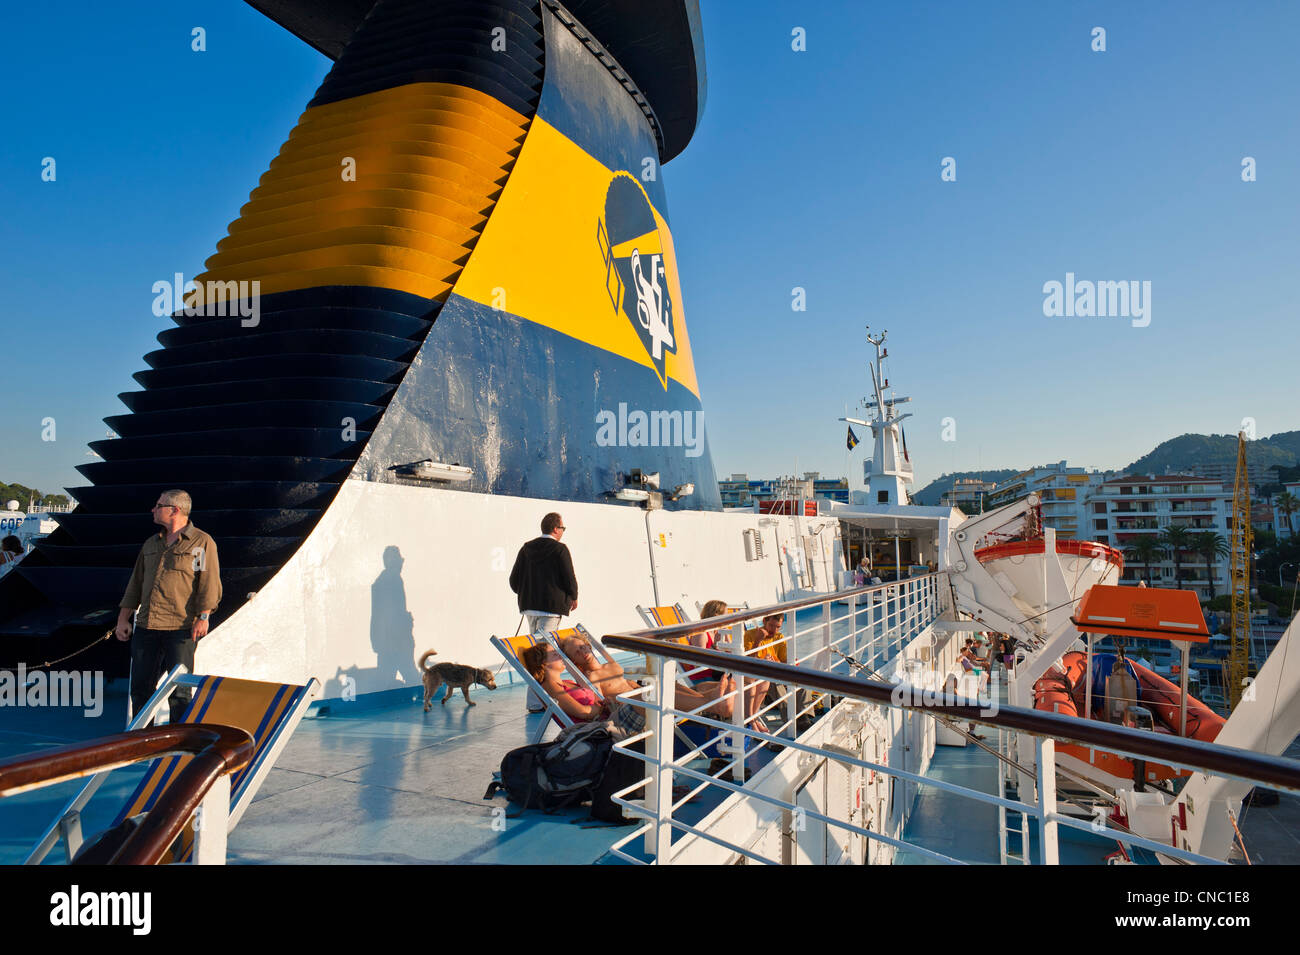 France, Alpes Maritimes, Nice, on the ferry of Corsica Ferries to Corsica from Nice Stock Photo